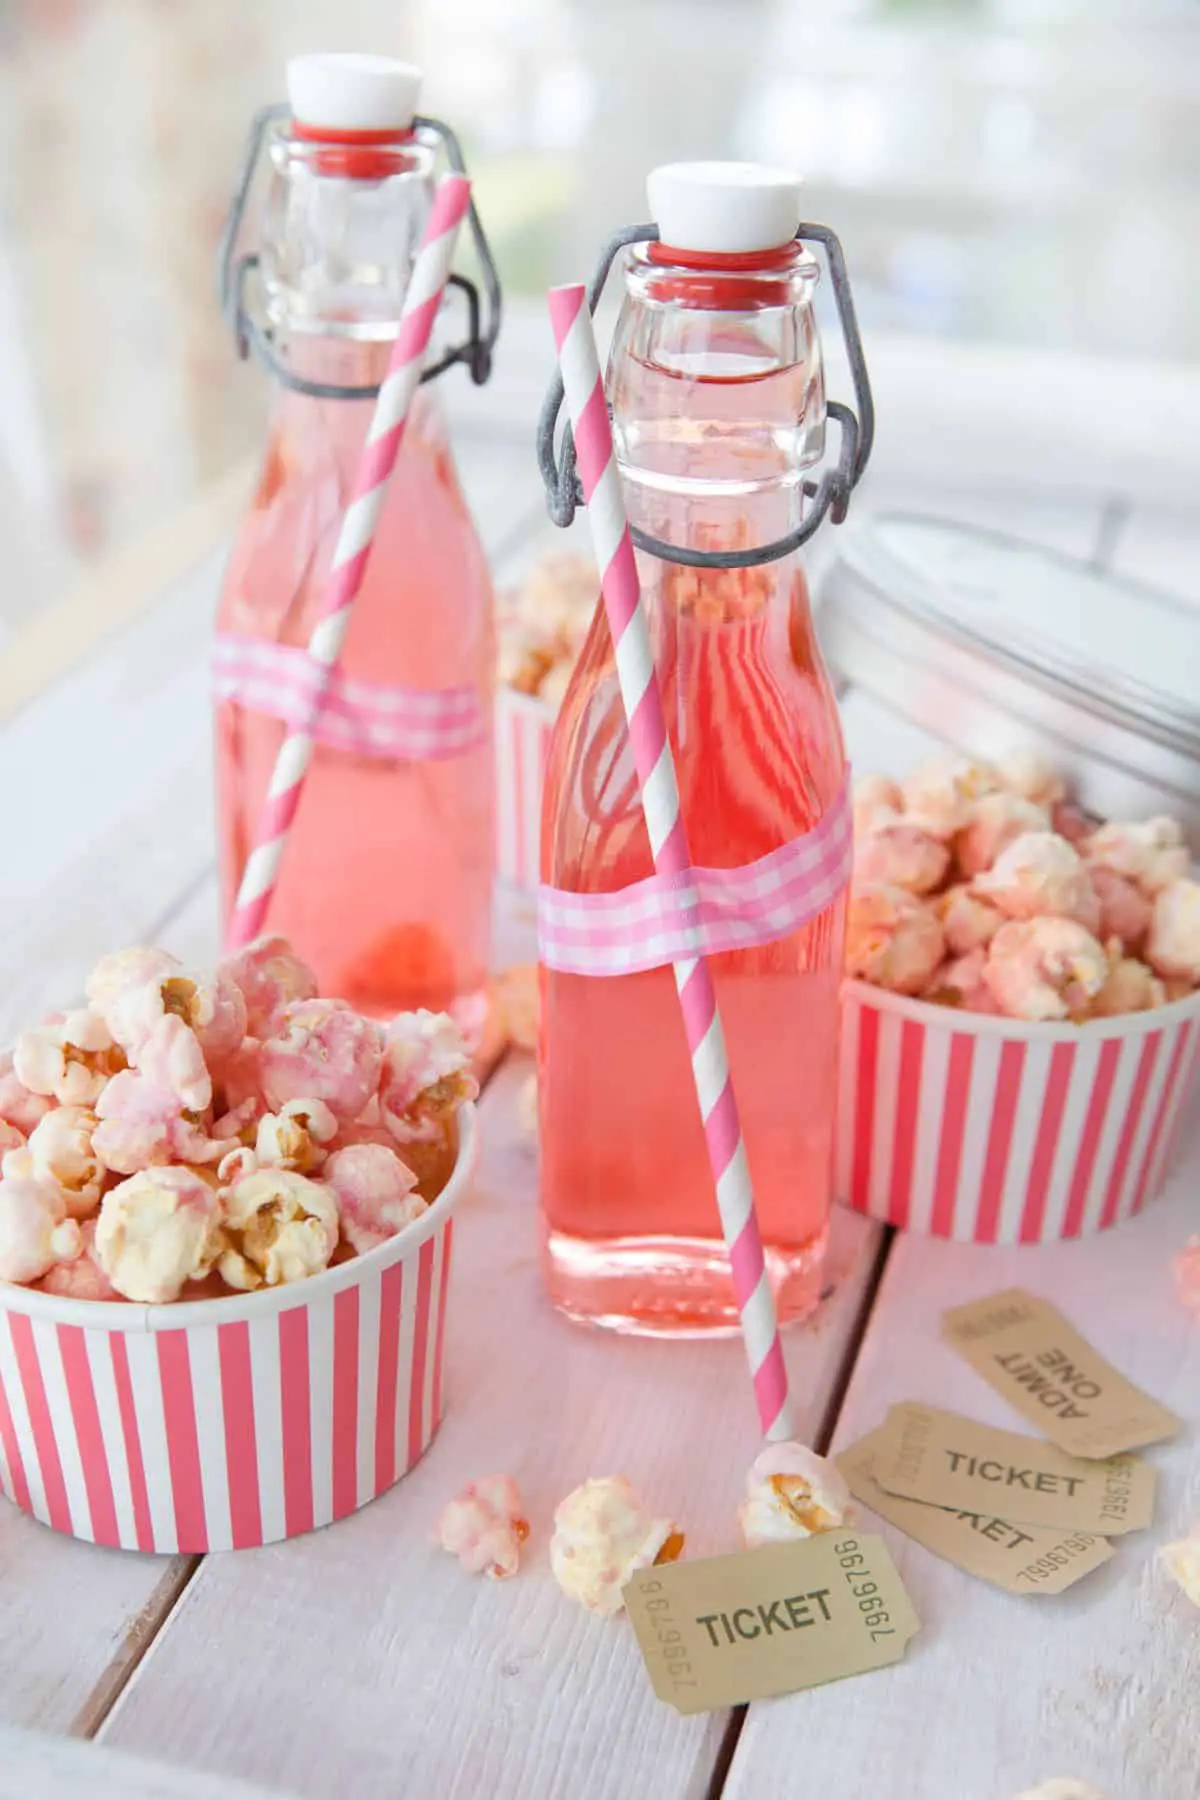 Bottles of pink lemonade and movie-themed straws and cups holding popcorn.